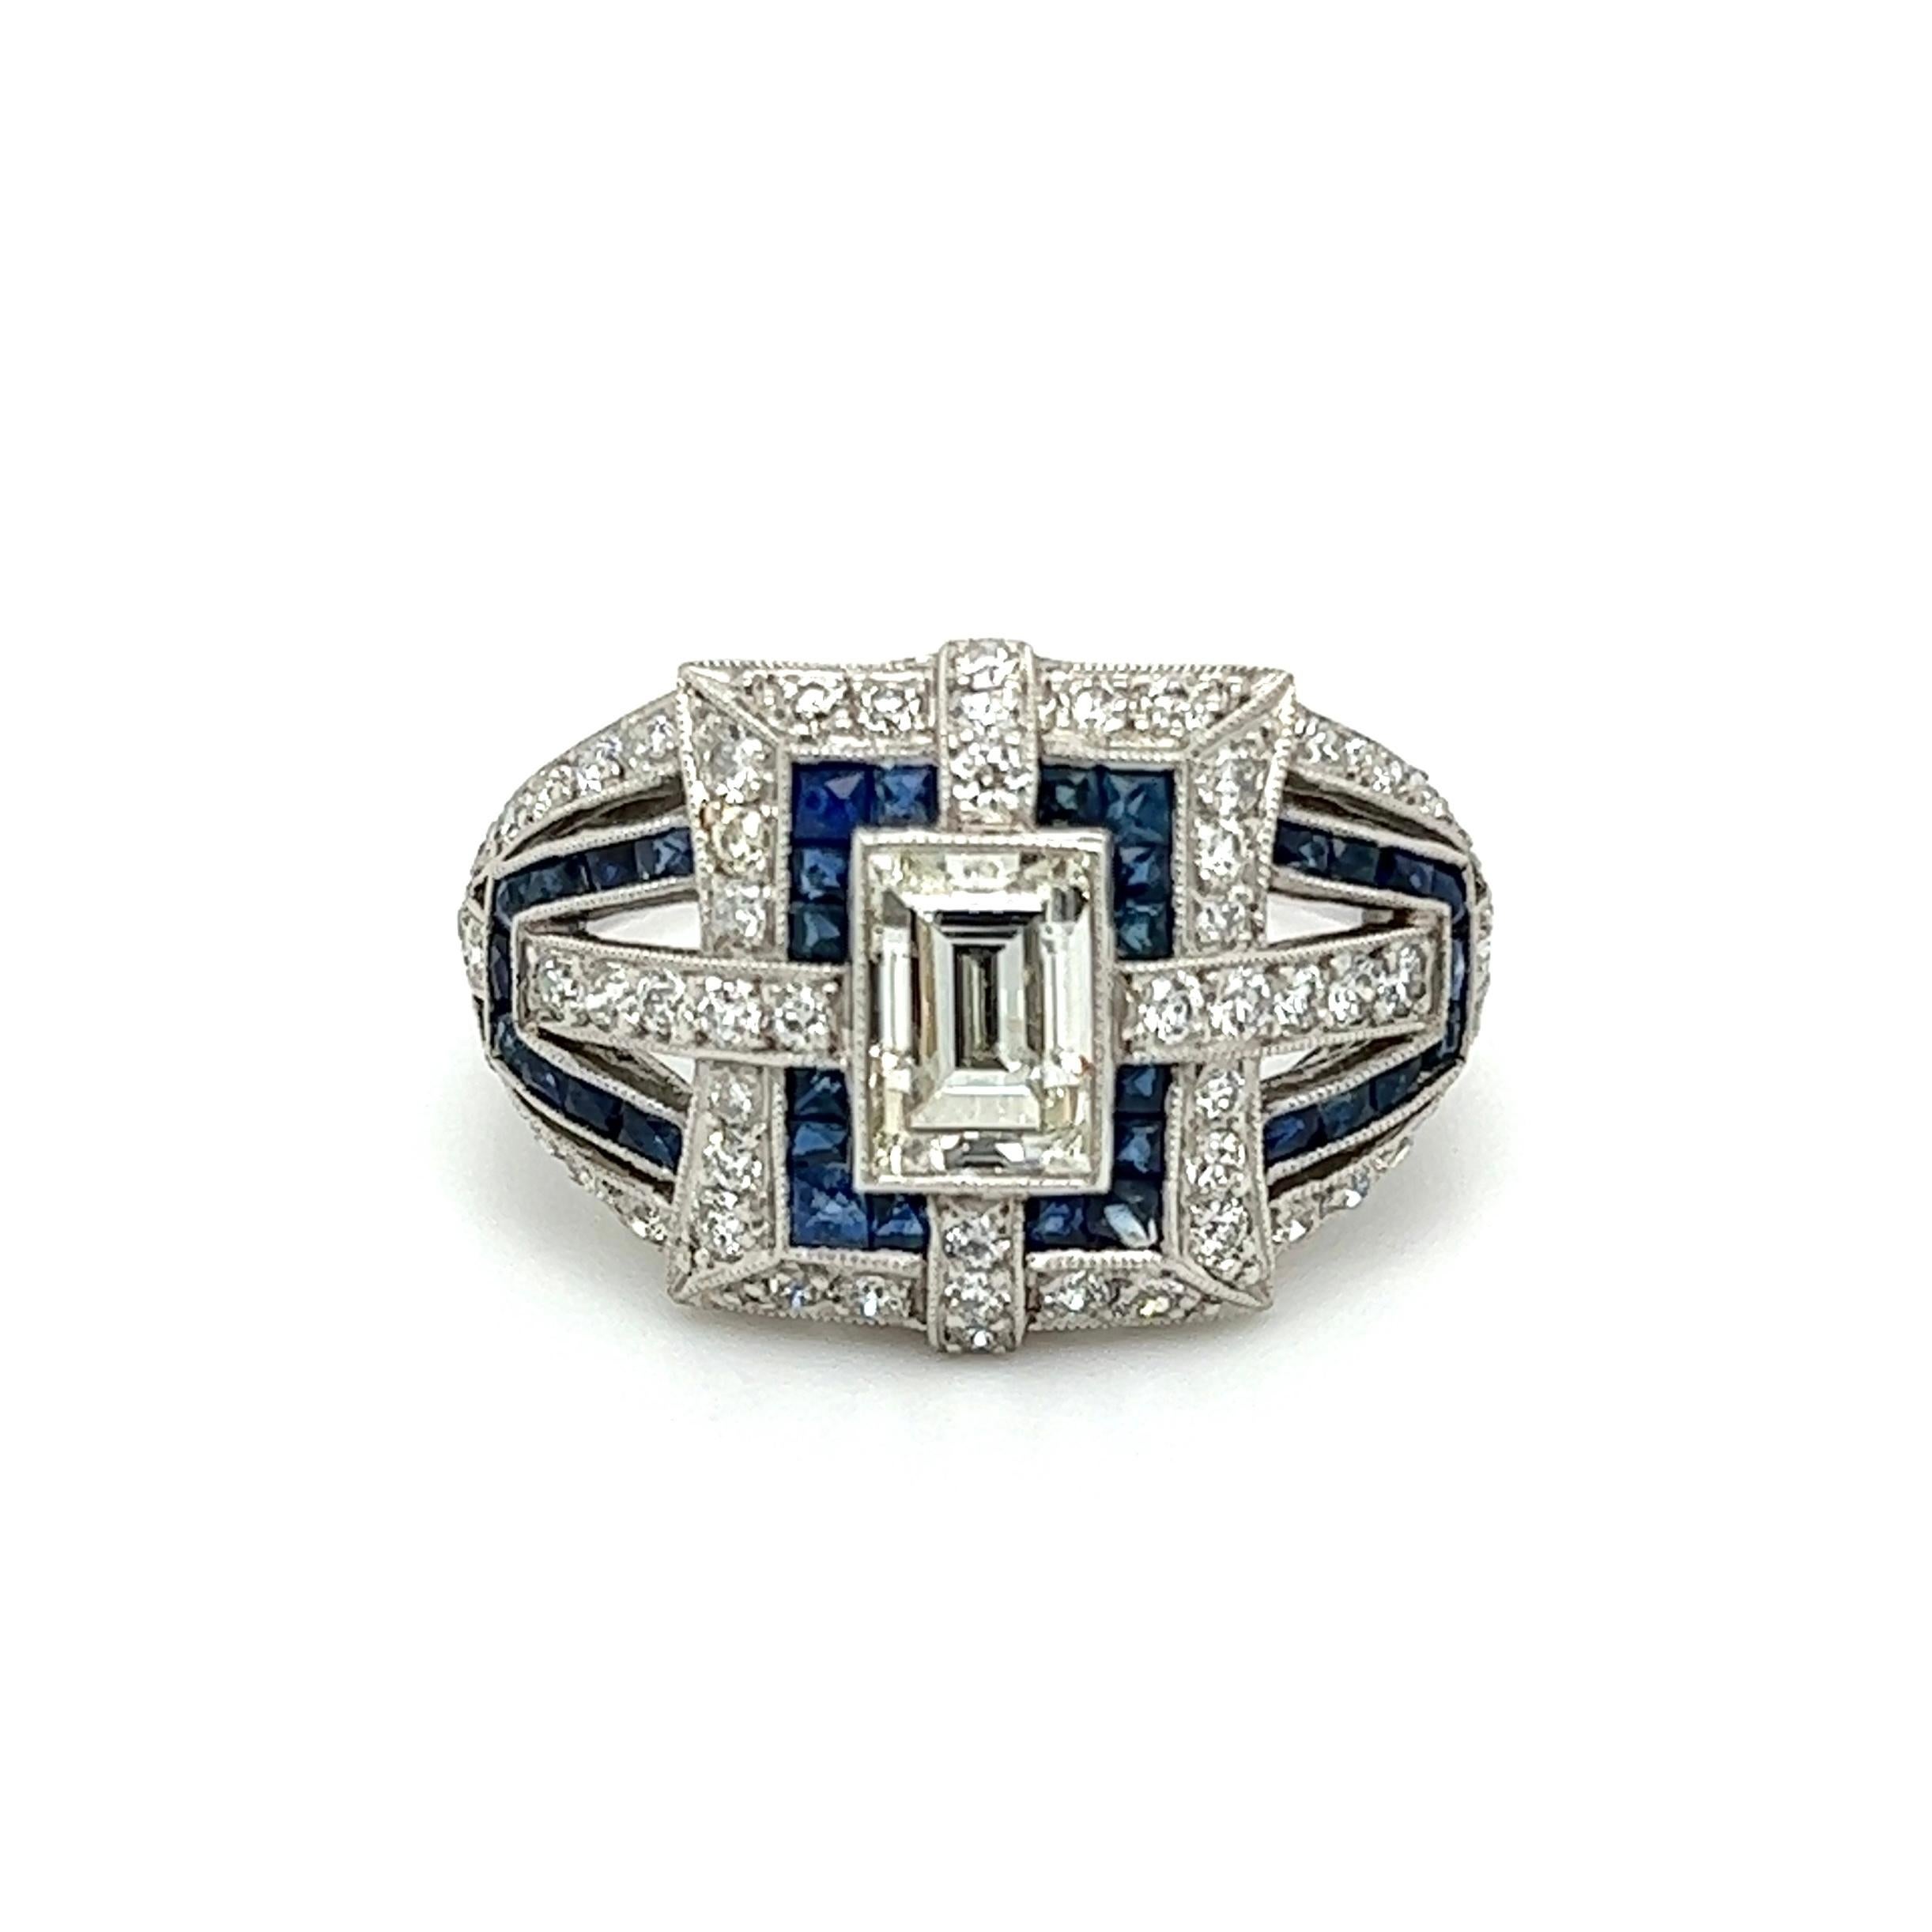 Simply Beautiful! Diamond and Sapphire Art Deco Revival Platinum Cocktail Ring. Centering a securely nestled Hand set Carré Diamond weighing approx. 1.01 Carat. Surrounded by Sapphires approx. 1.20tcw and Diamonds approx. 0.81tcw. Hand crafted